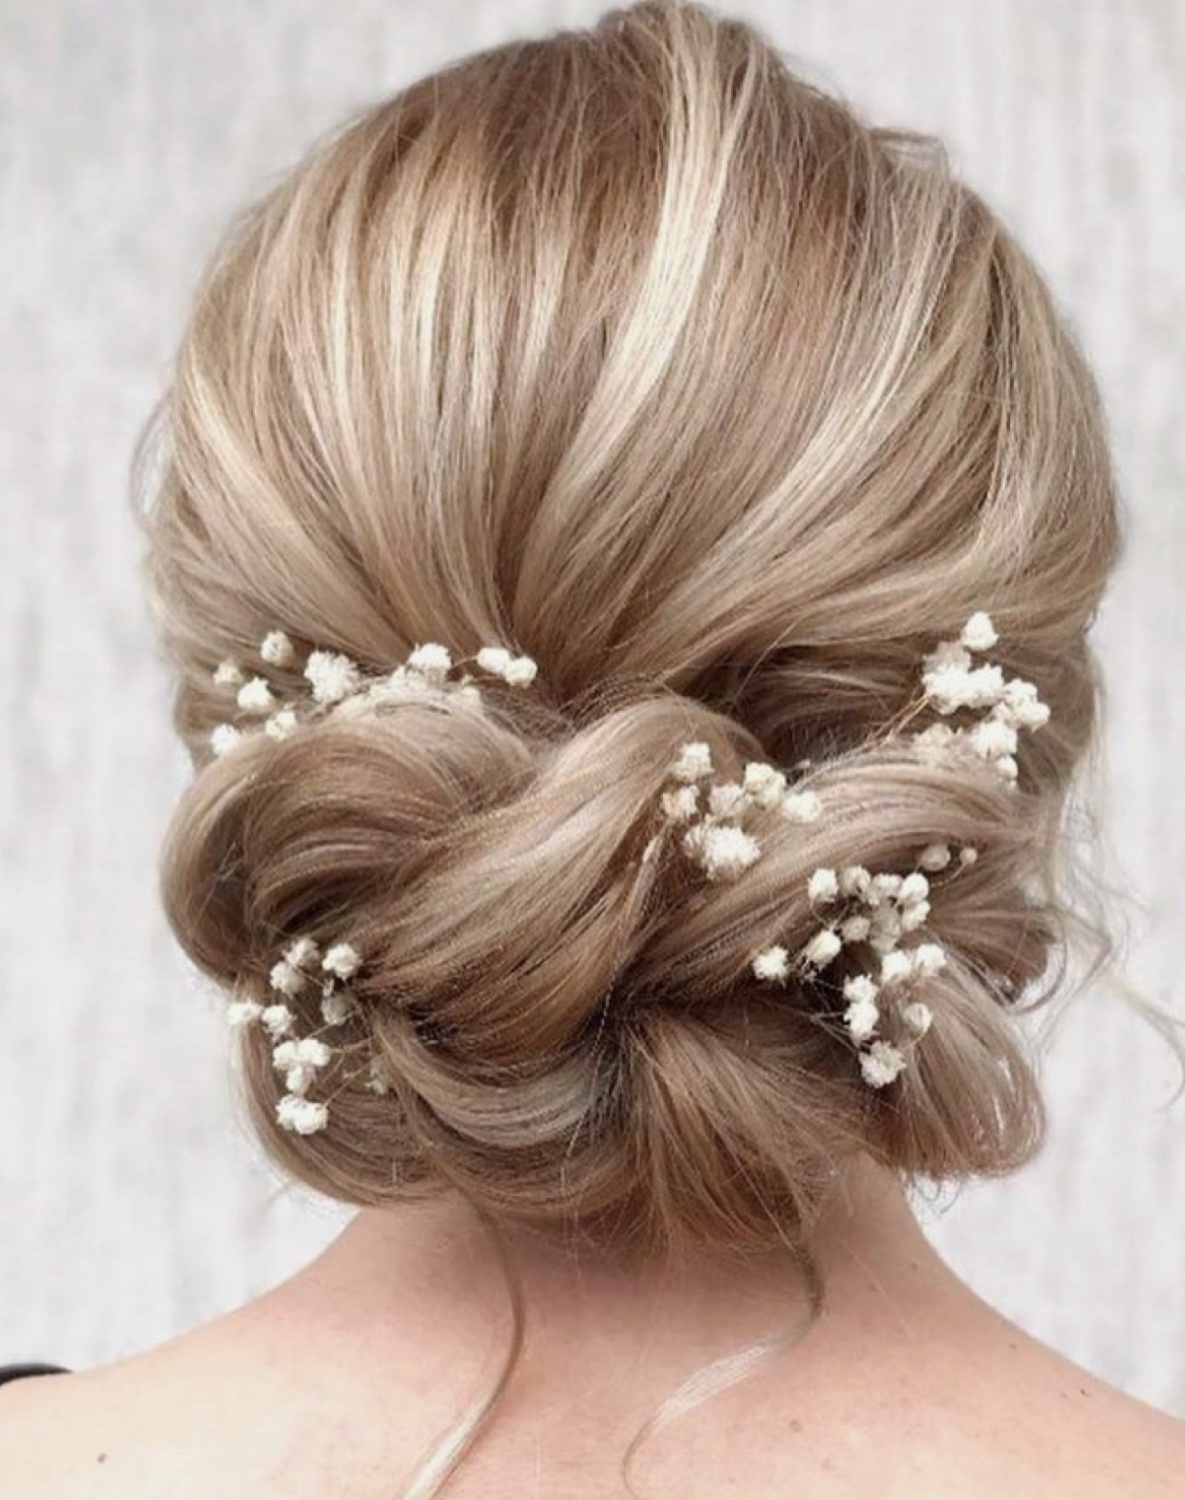 How Should Mother Of Groom Wear Her Hair